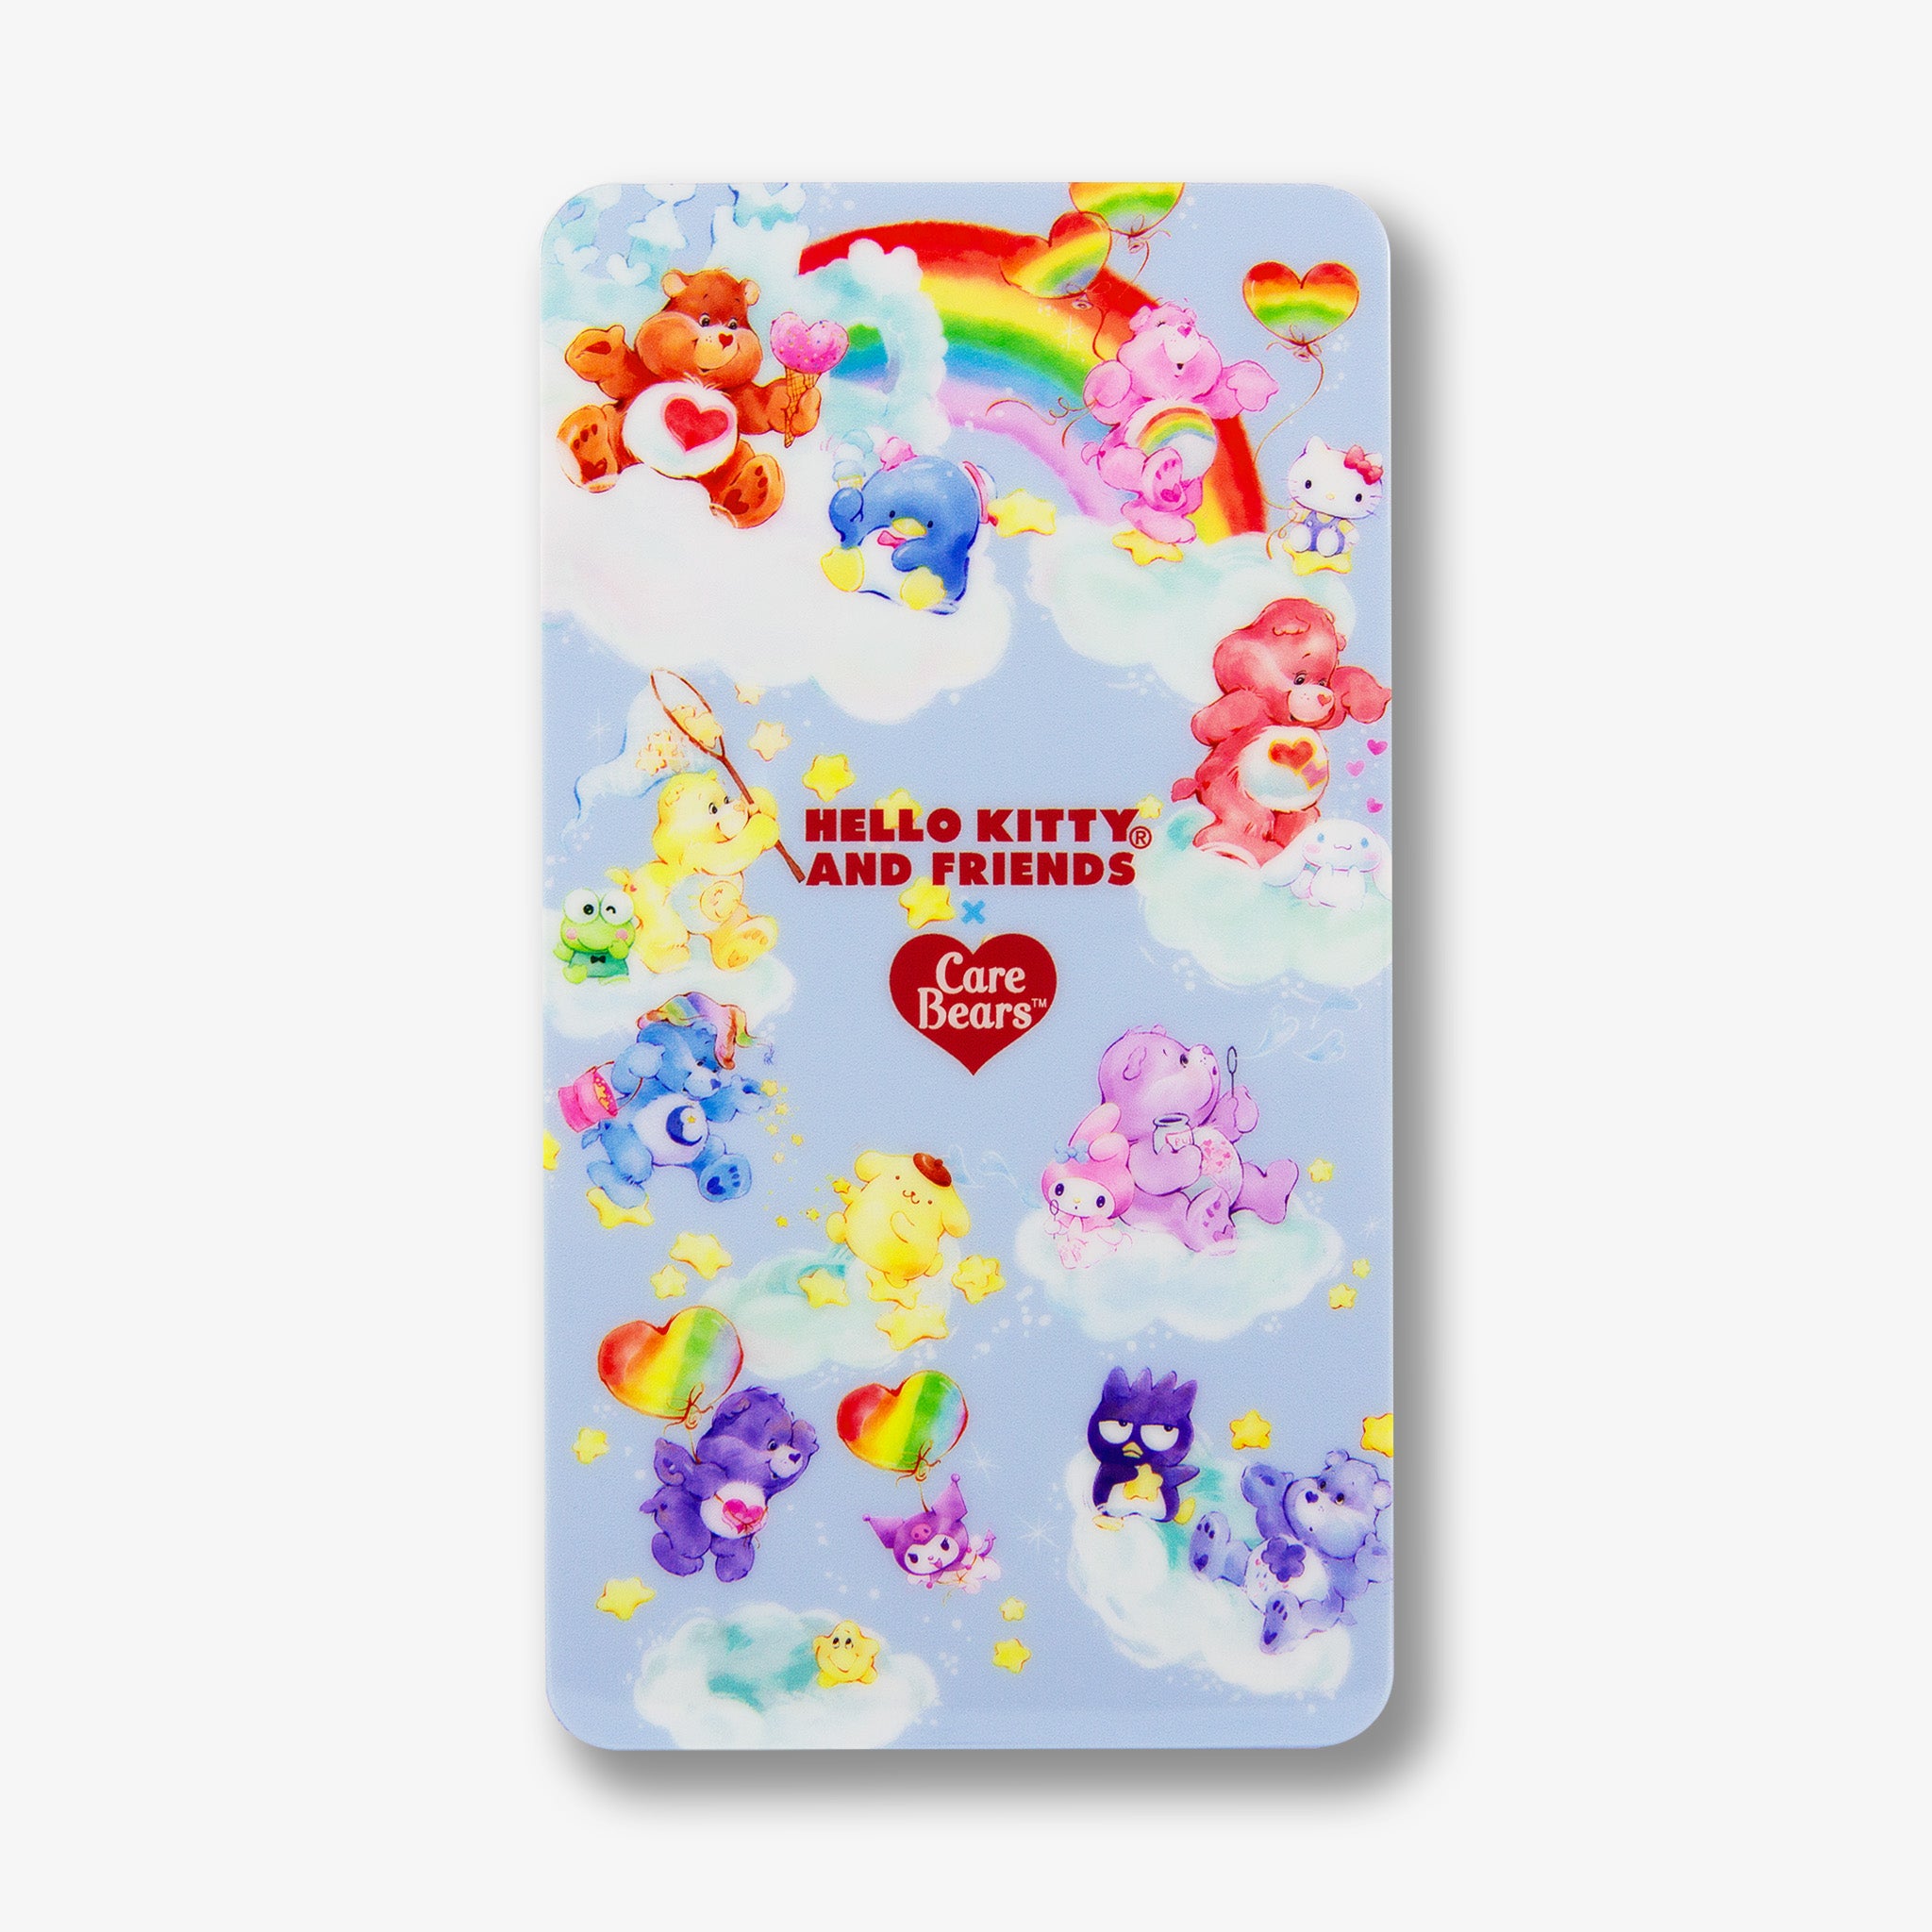 Power Pack - Care Bears™ + Hello Kitty®  and Friends